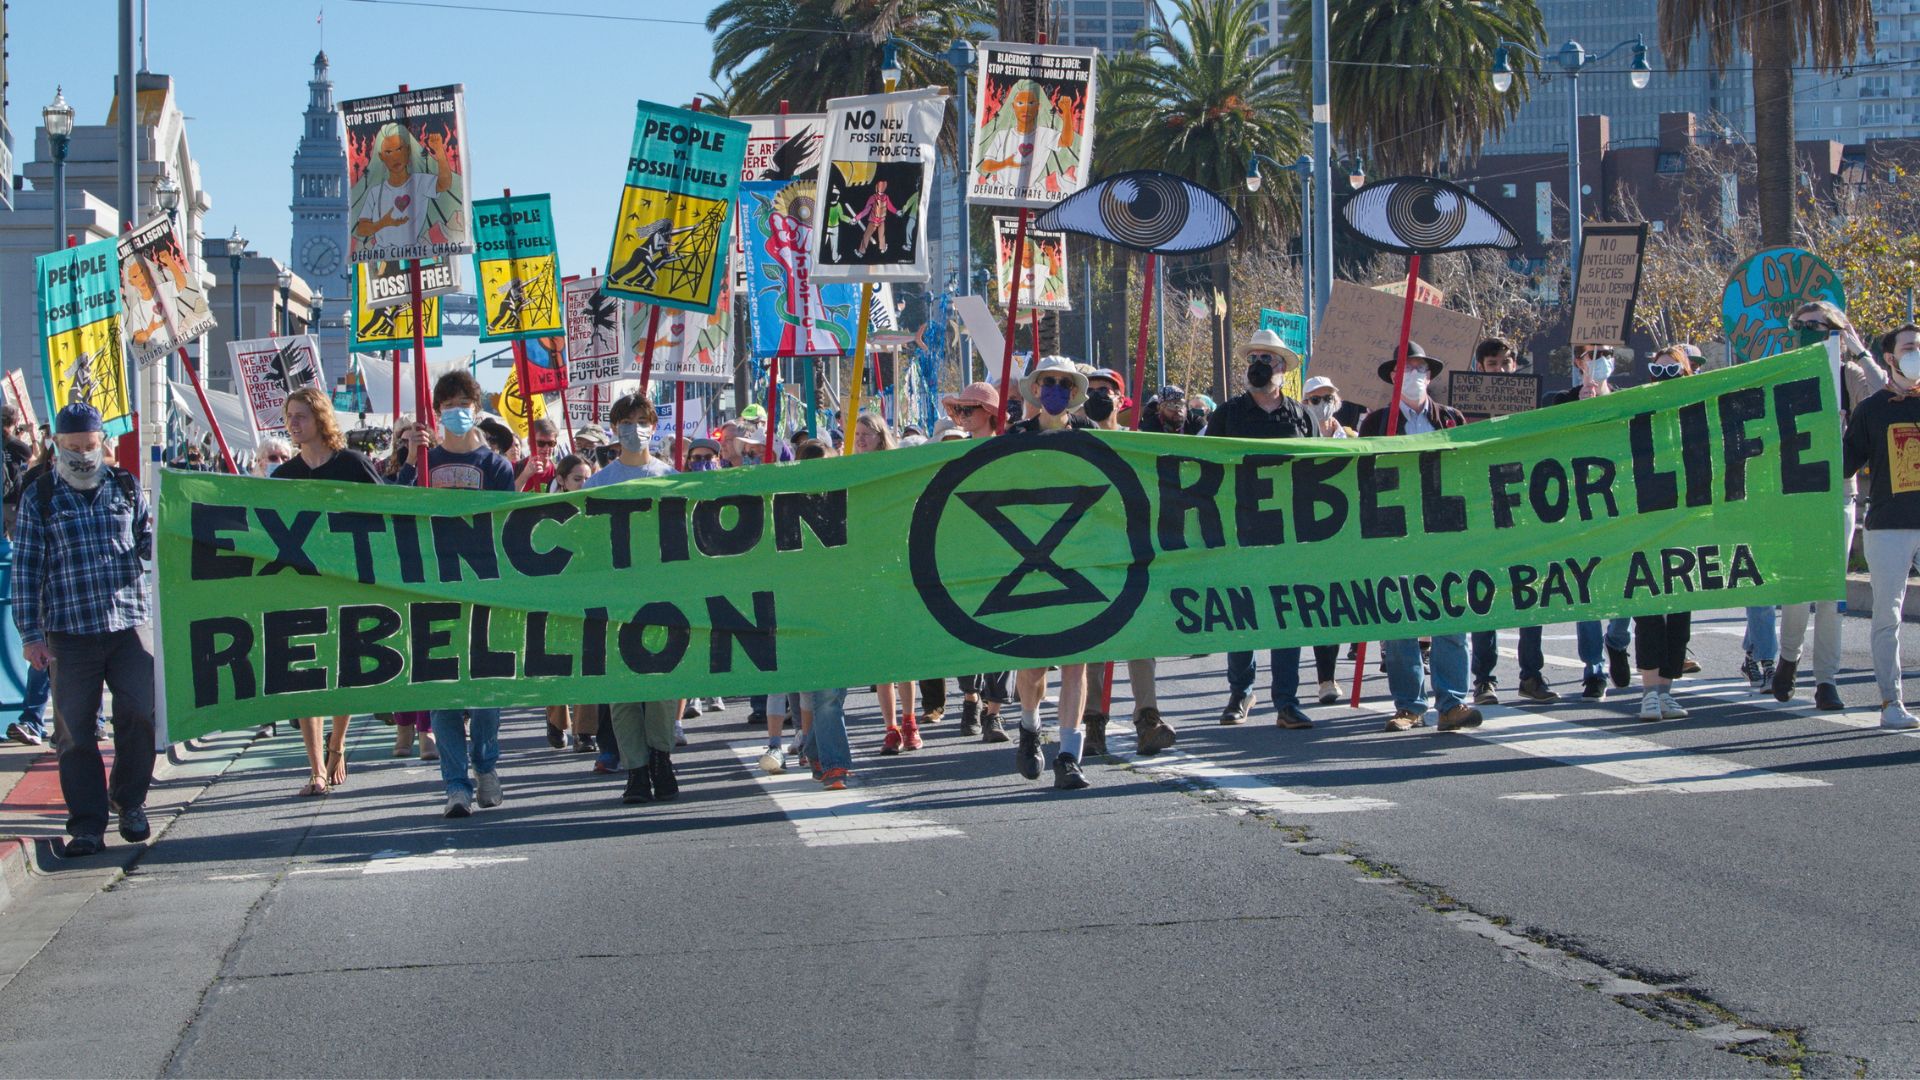 Extinction Rebellion Bay Area and Sustainability and Resilience